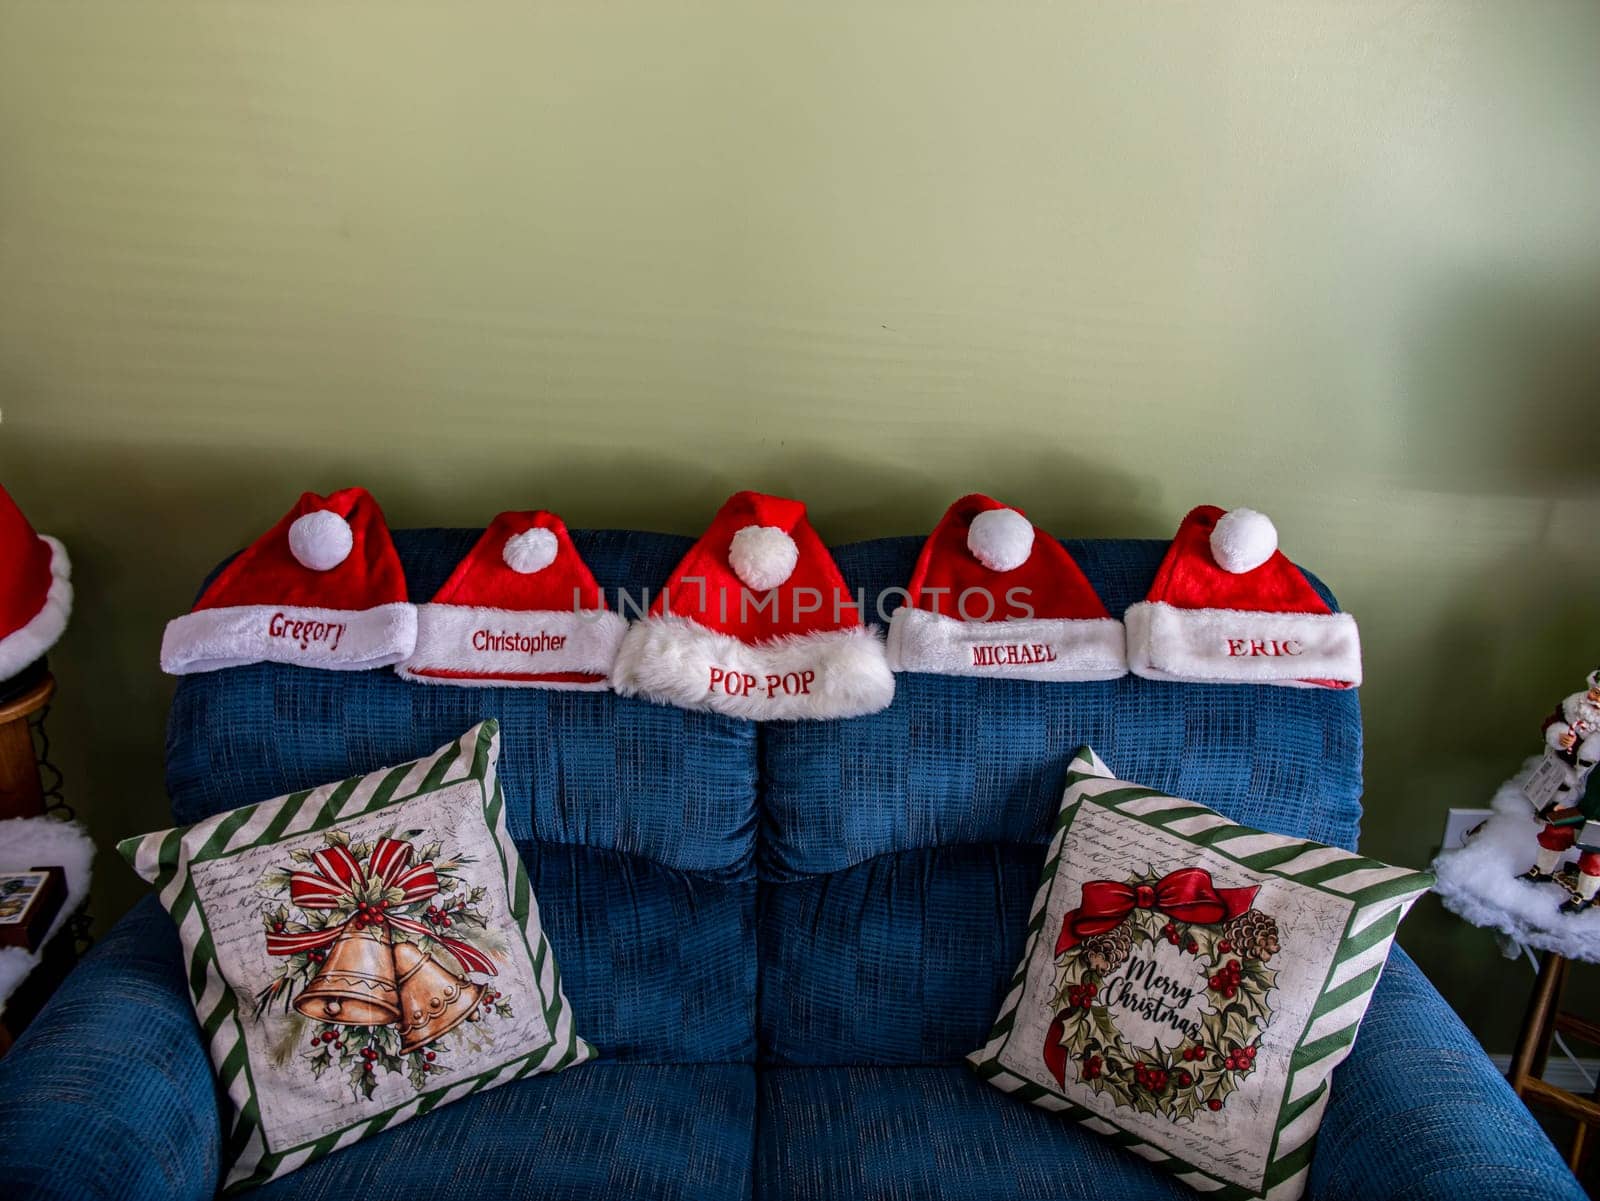 A group of five red santa hats are sitting on a blue couch by actionphoto50